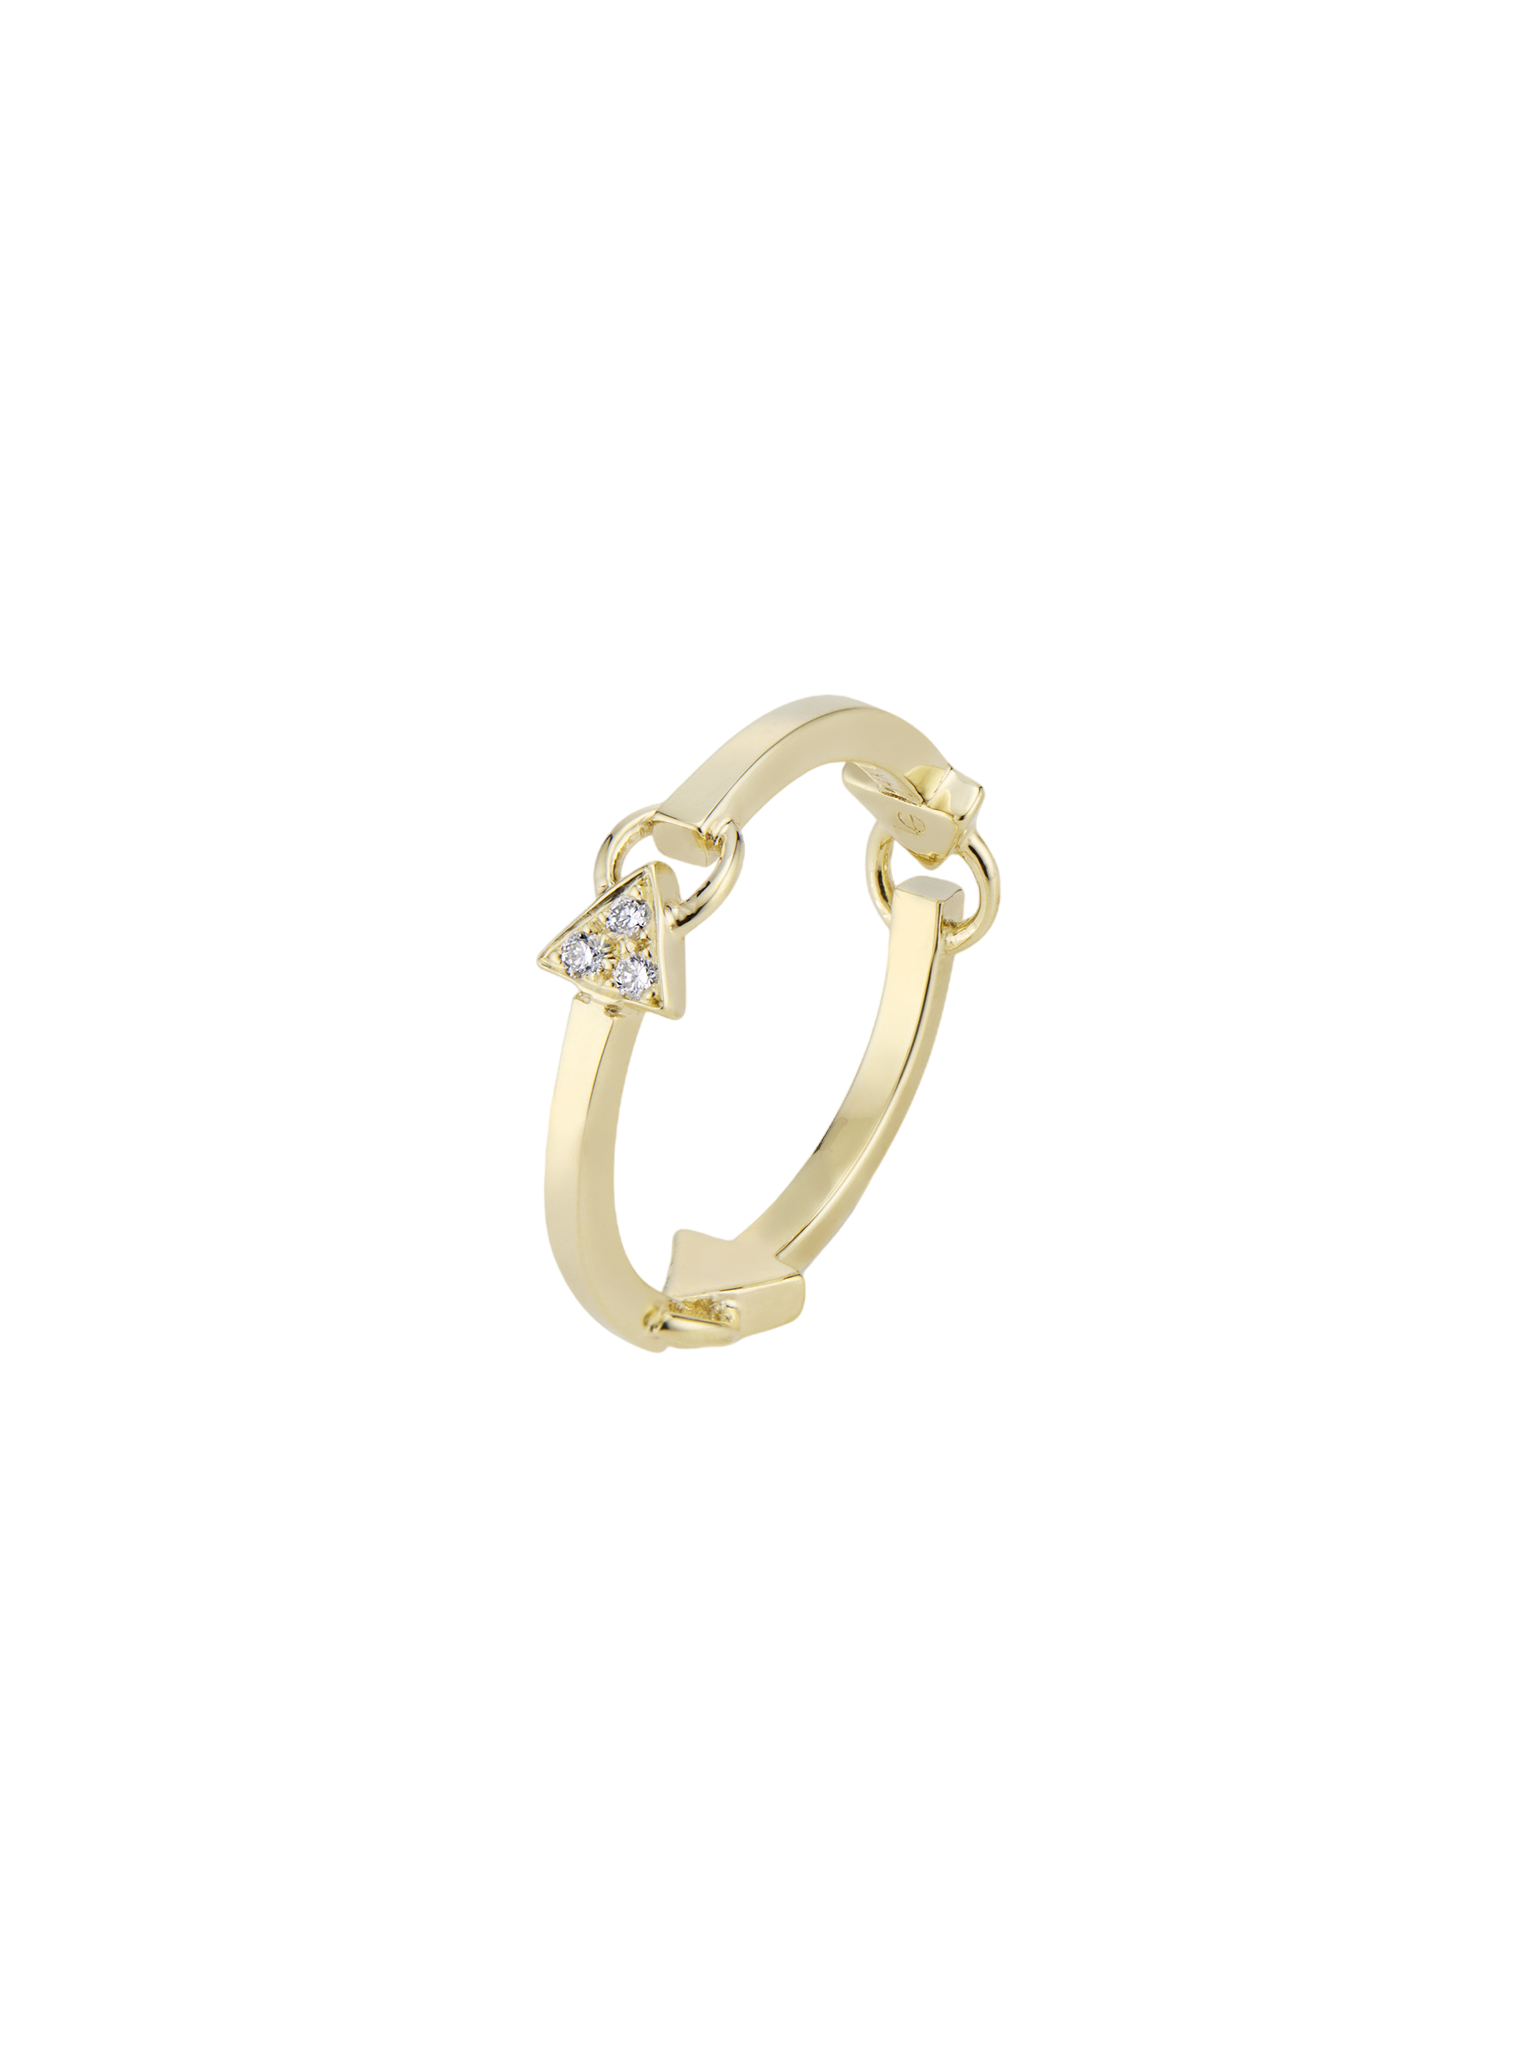 Foundation stacking ring